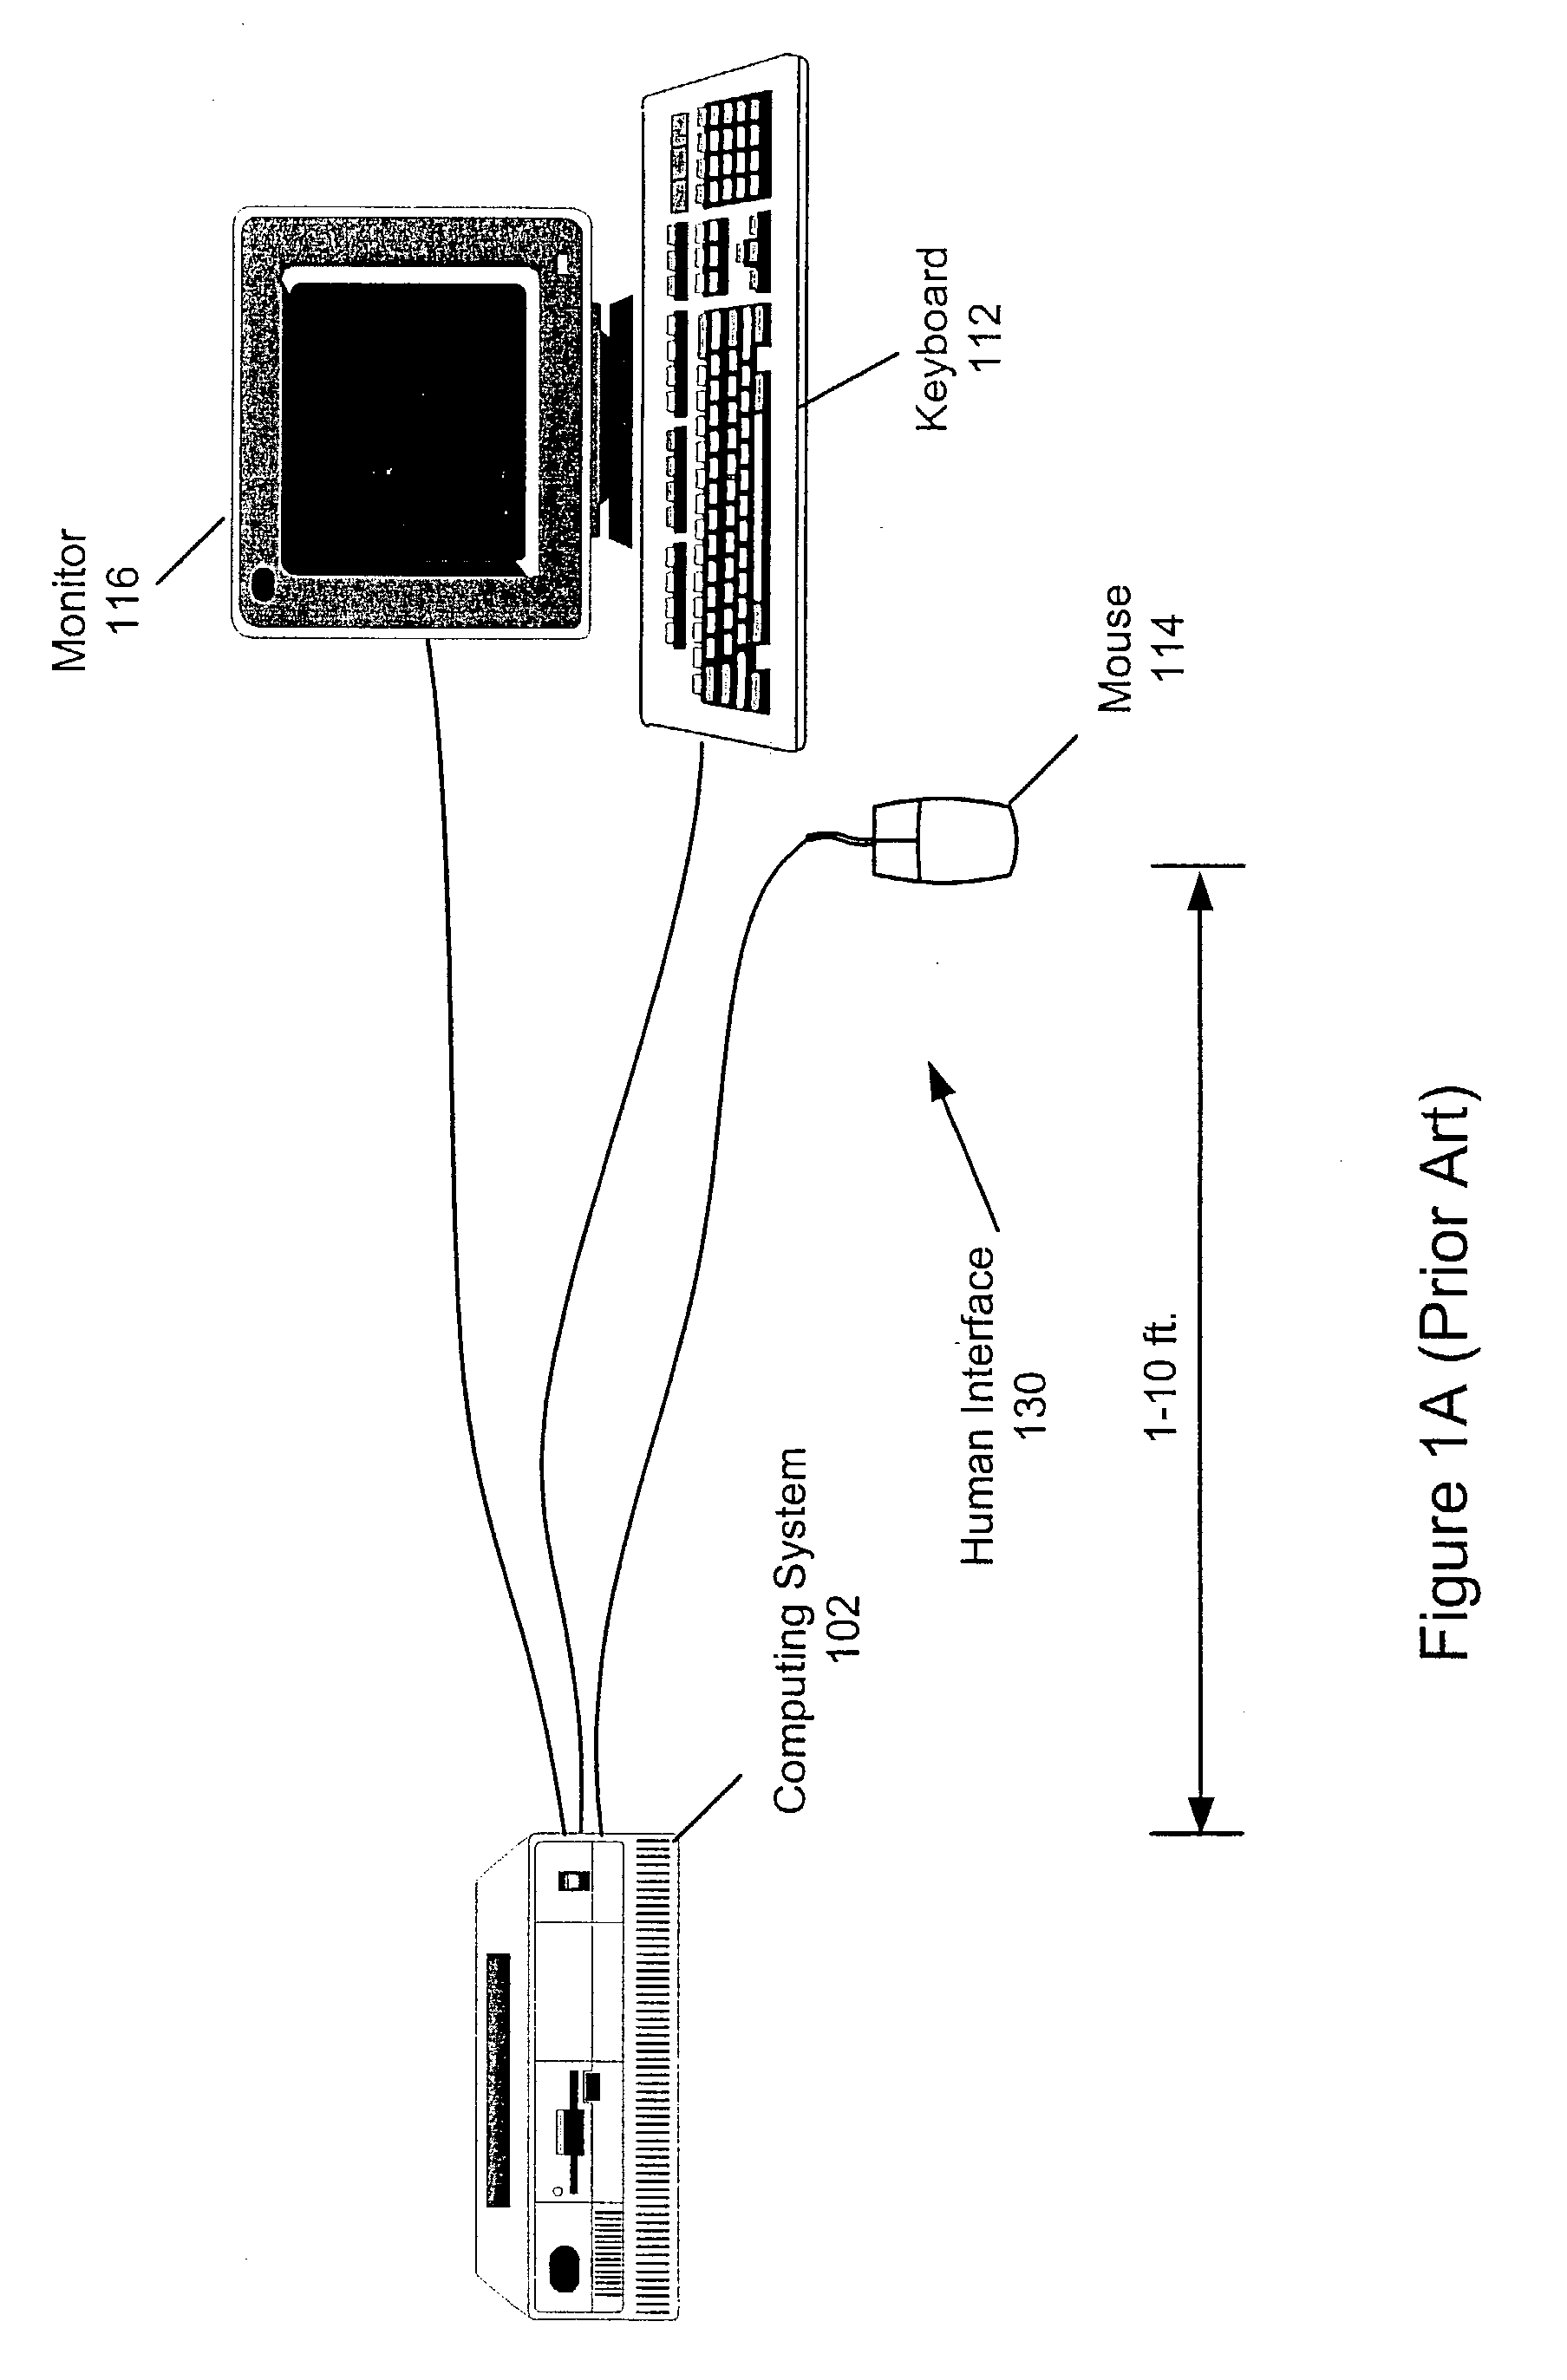 System of co-located computers with content and/or communications distribution